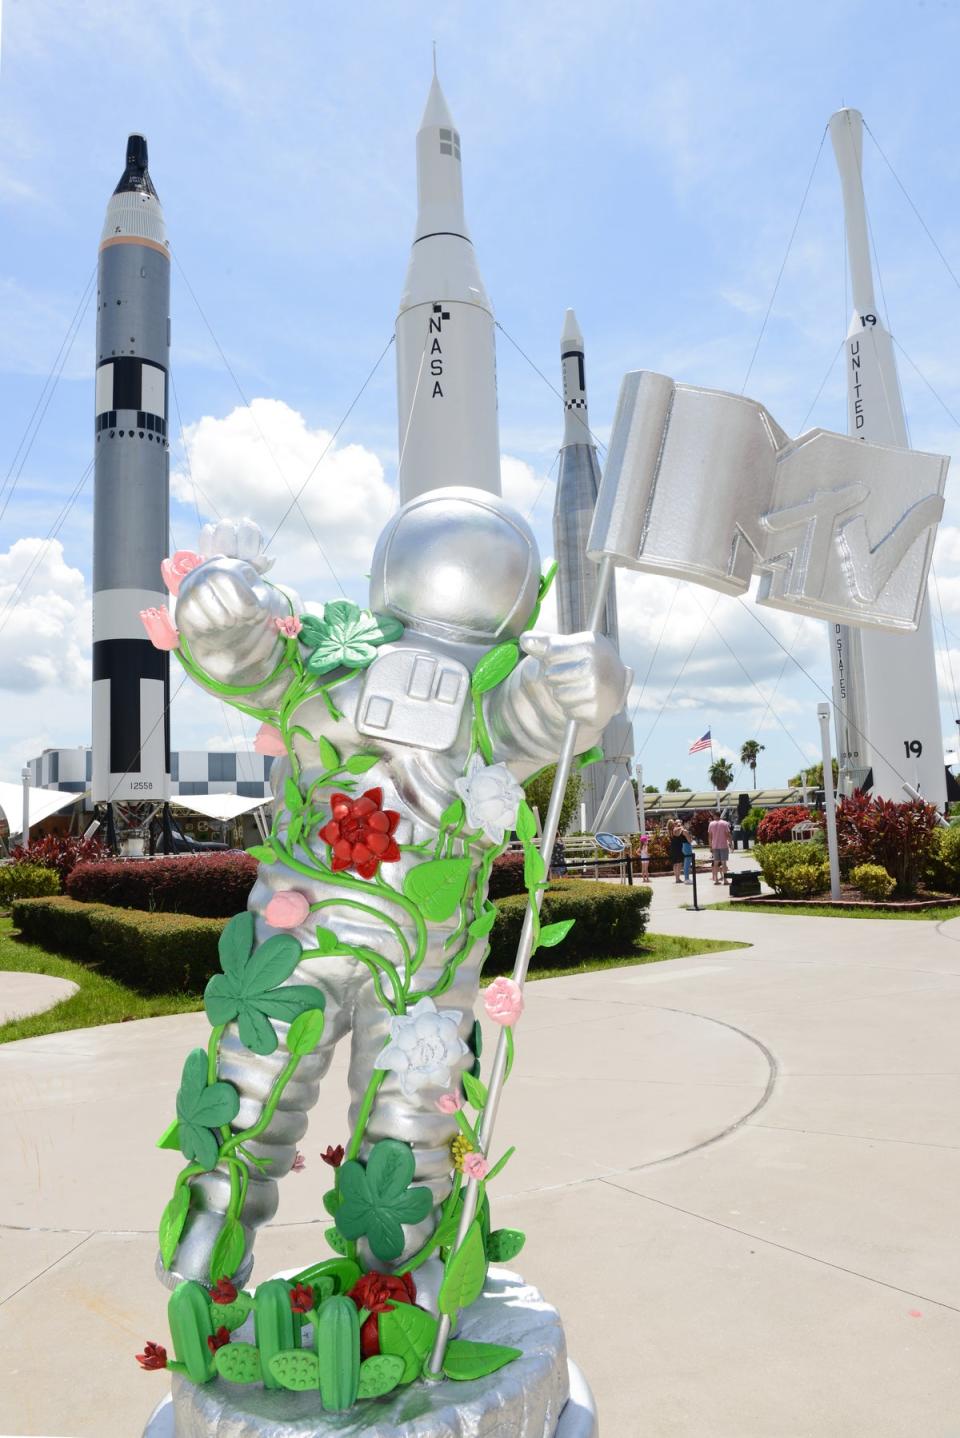 MTV unveils special edition large-scale Moon Person at Kennedy Space Center (Getty Images for MTV)